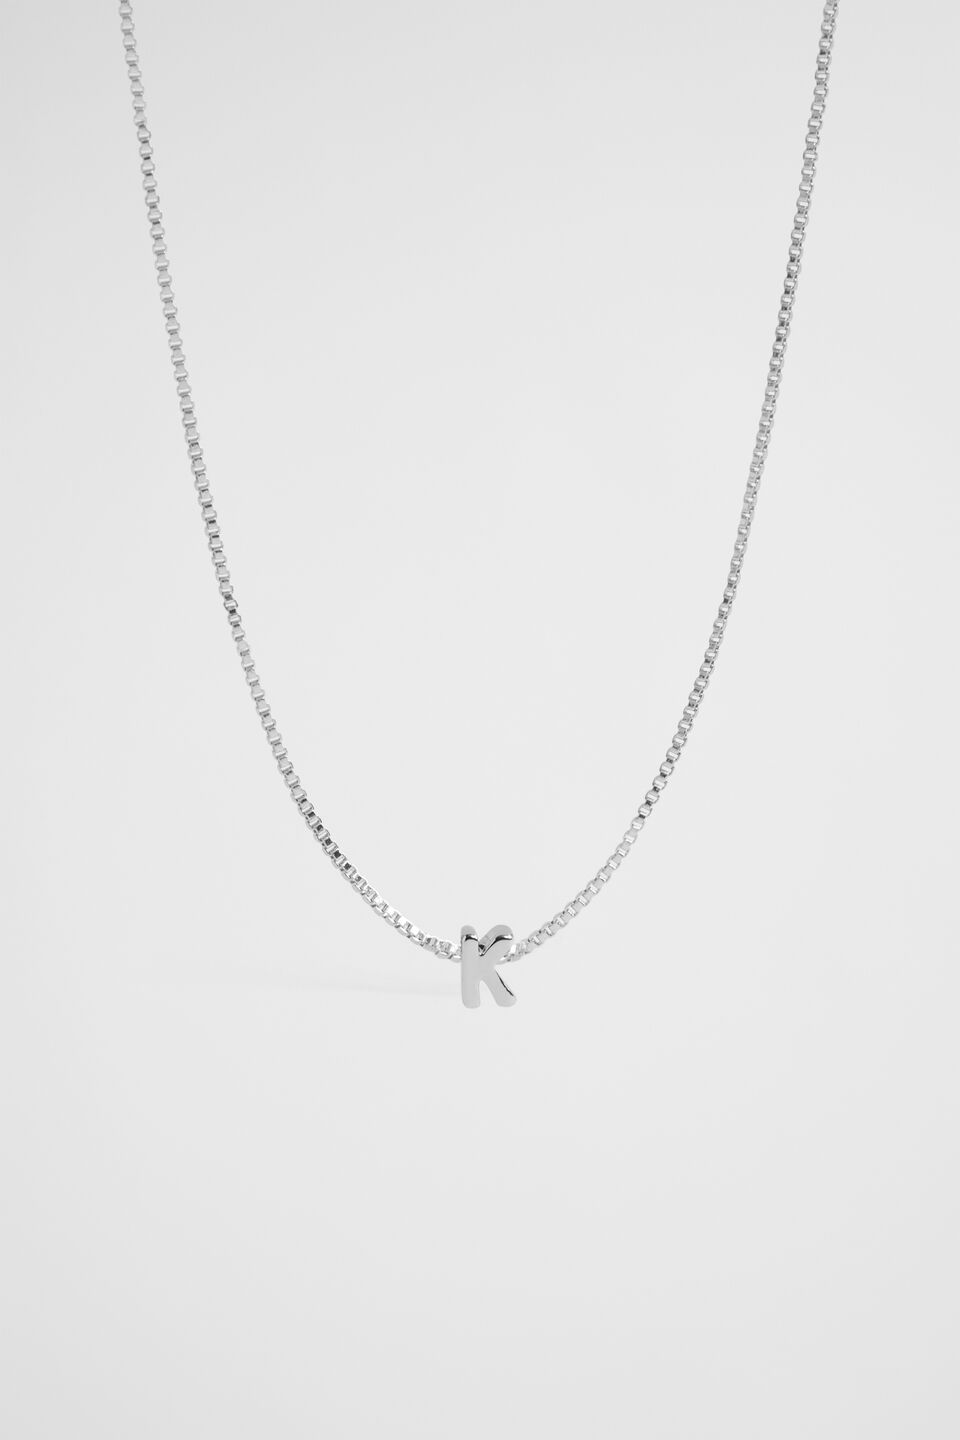 Silver Initial Necklace  K